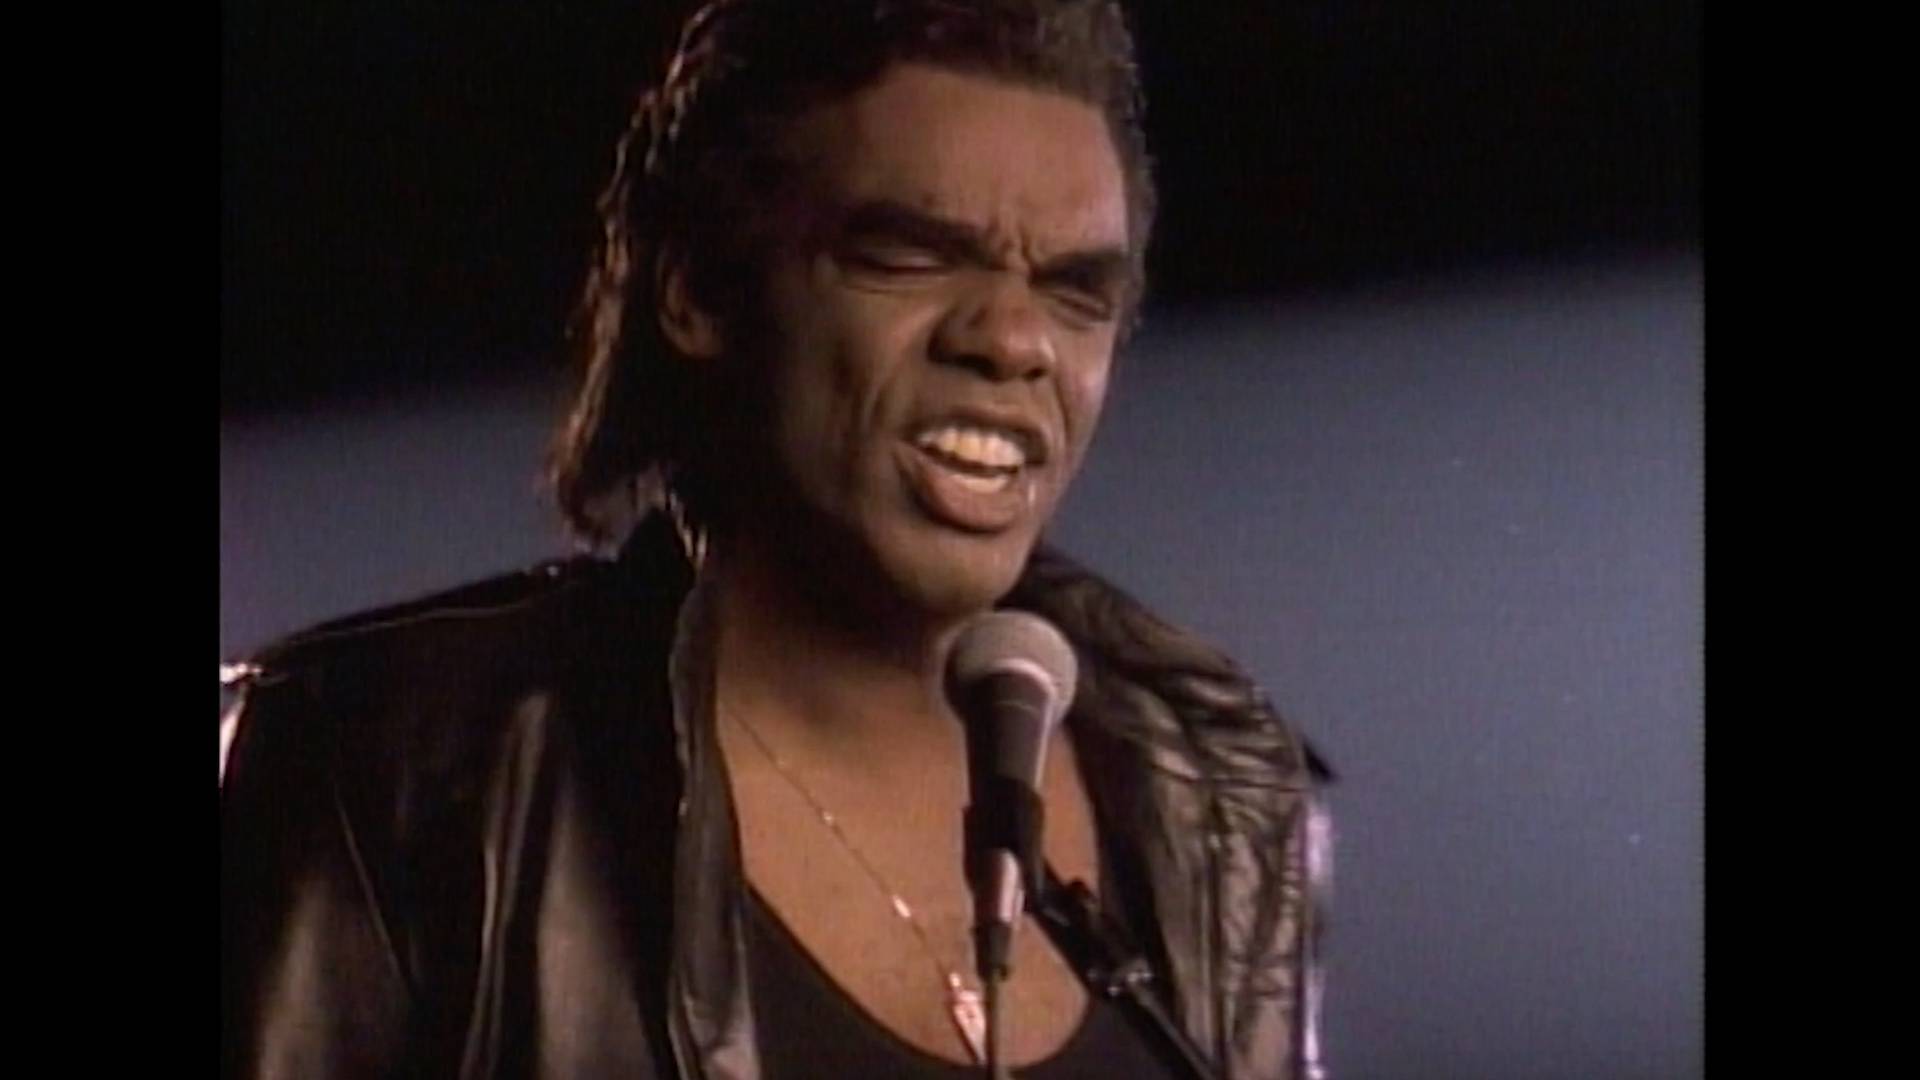 Ron Isley in the "It Takes a Good Woman" music video.